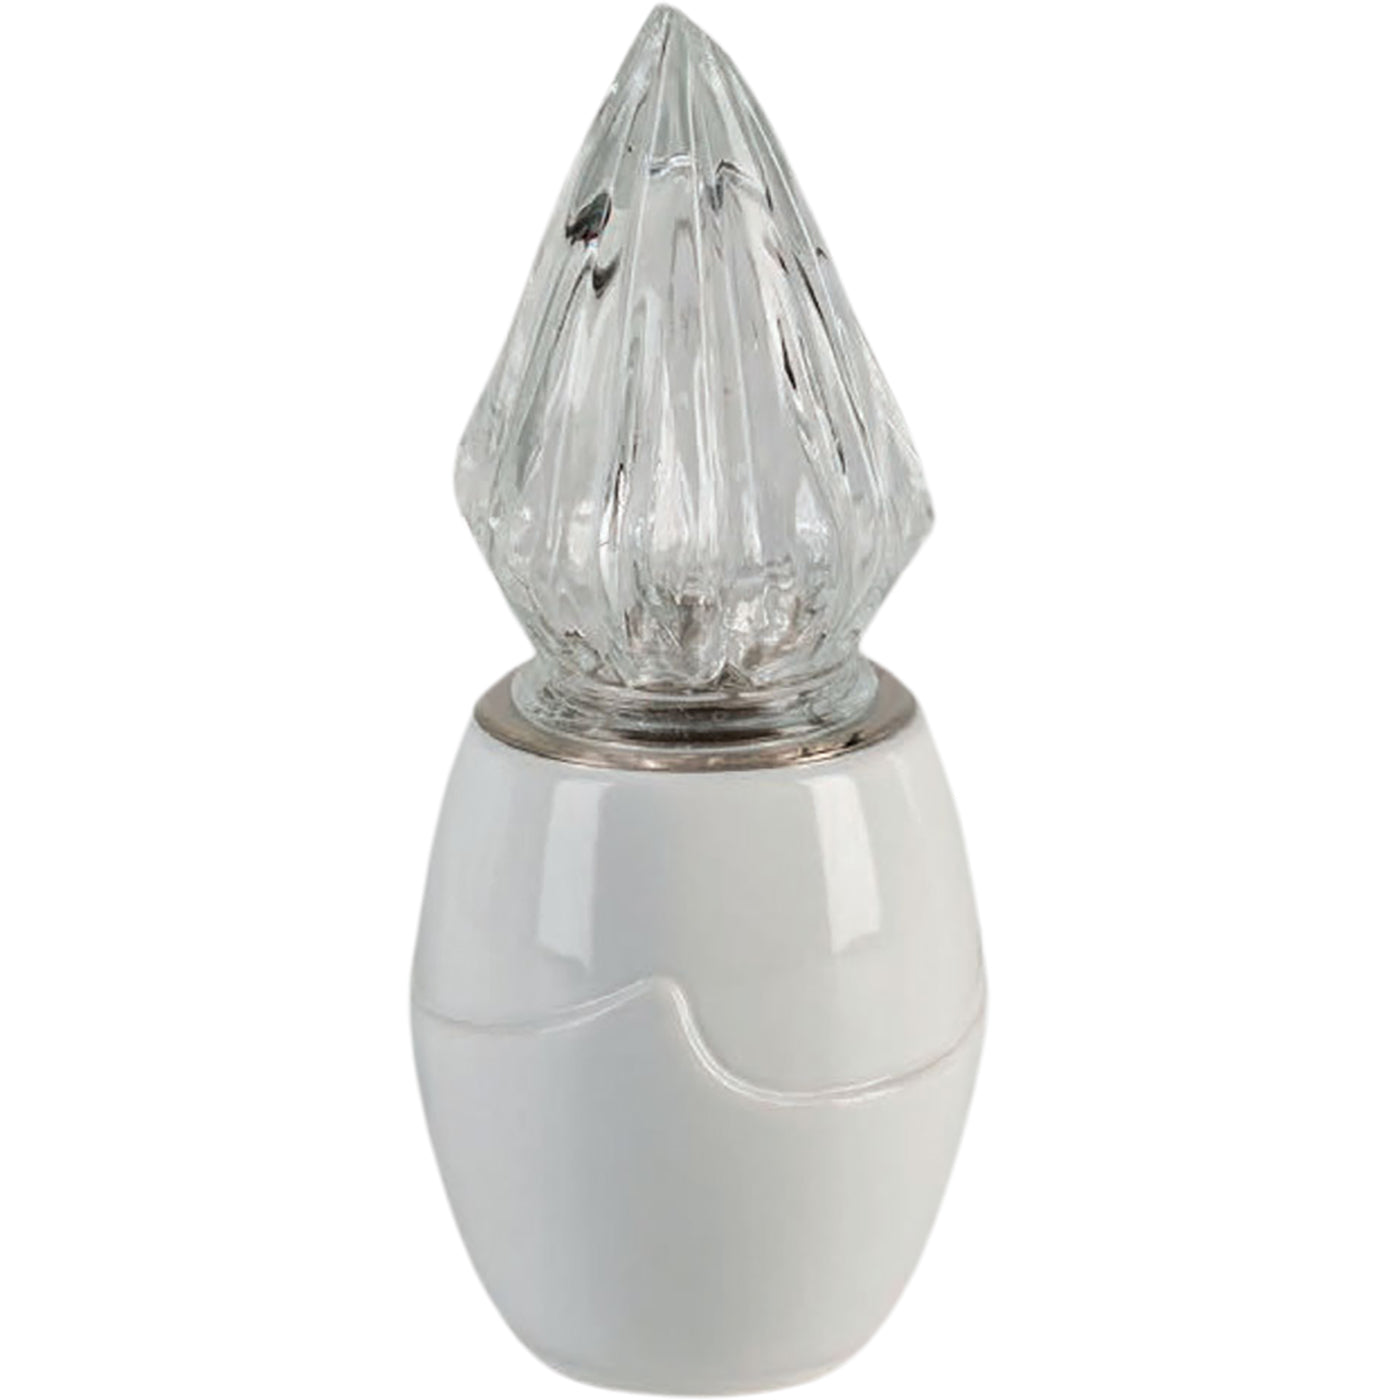 Grave light Onda 10x10cm - 3.9x3.9in In white porcelain, ground attached ON170T